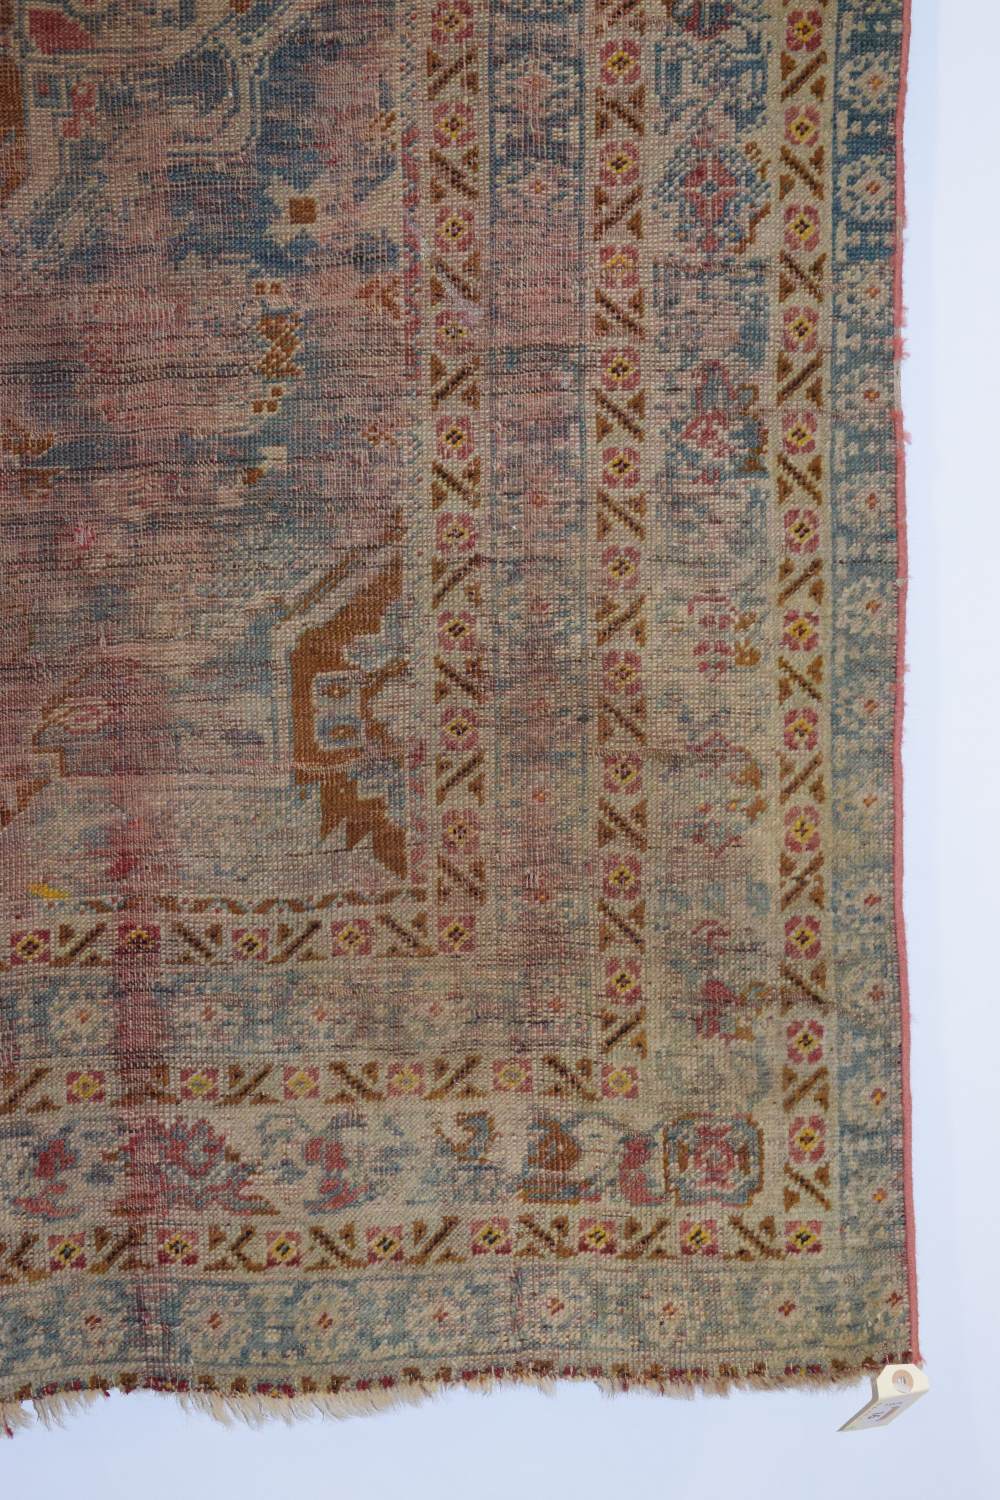 Melas rug, west Anatolia, 19th century, 5ft. 6in. X 3ft. 10in. 1.68m. X 1.17m. Overall wear, heavy - Image 2 of 11